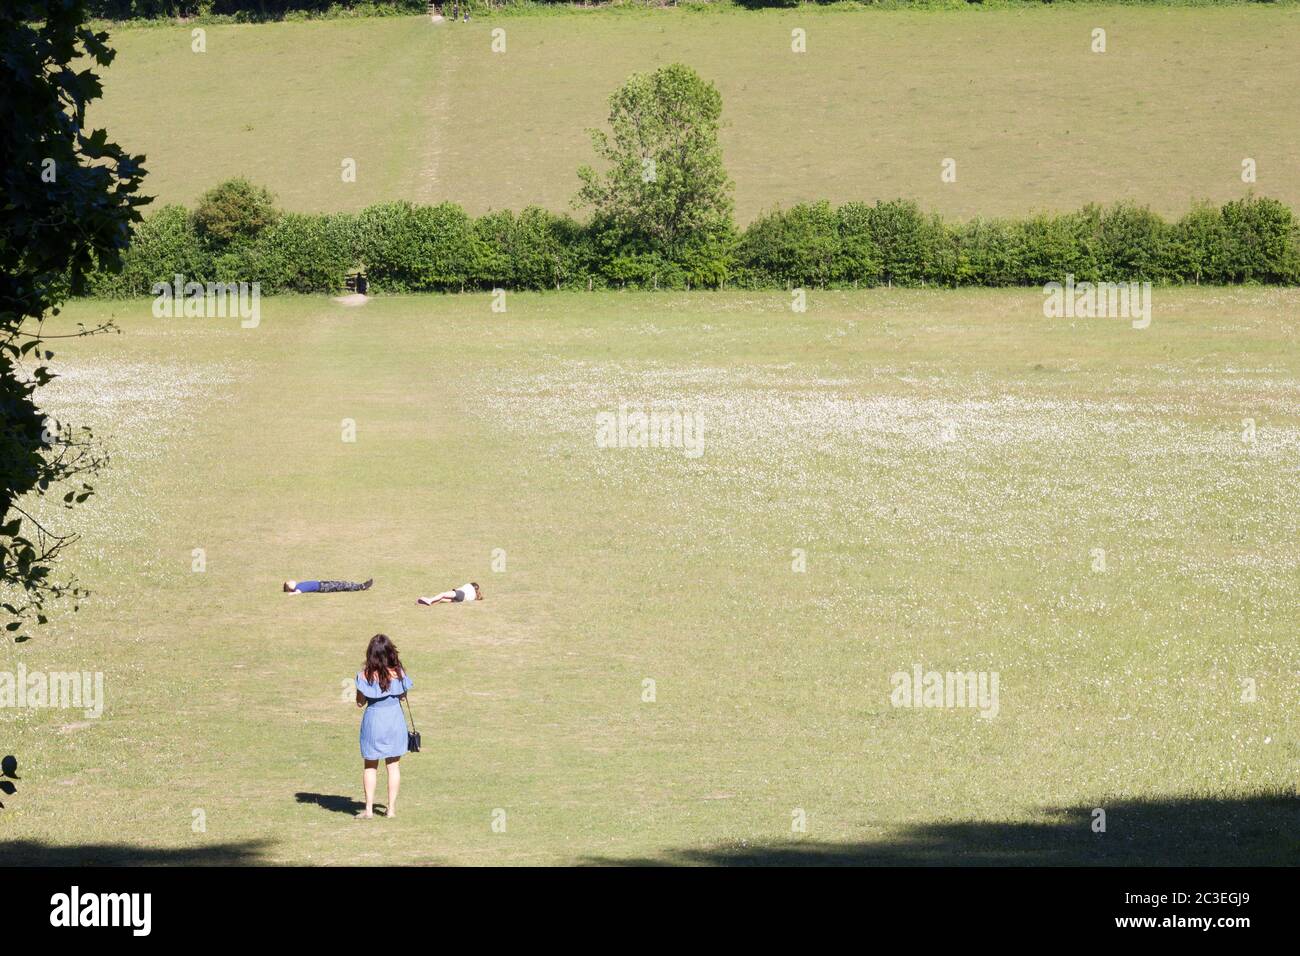 Family day out during English summer playing in the countryside field, UK Stock Photo